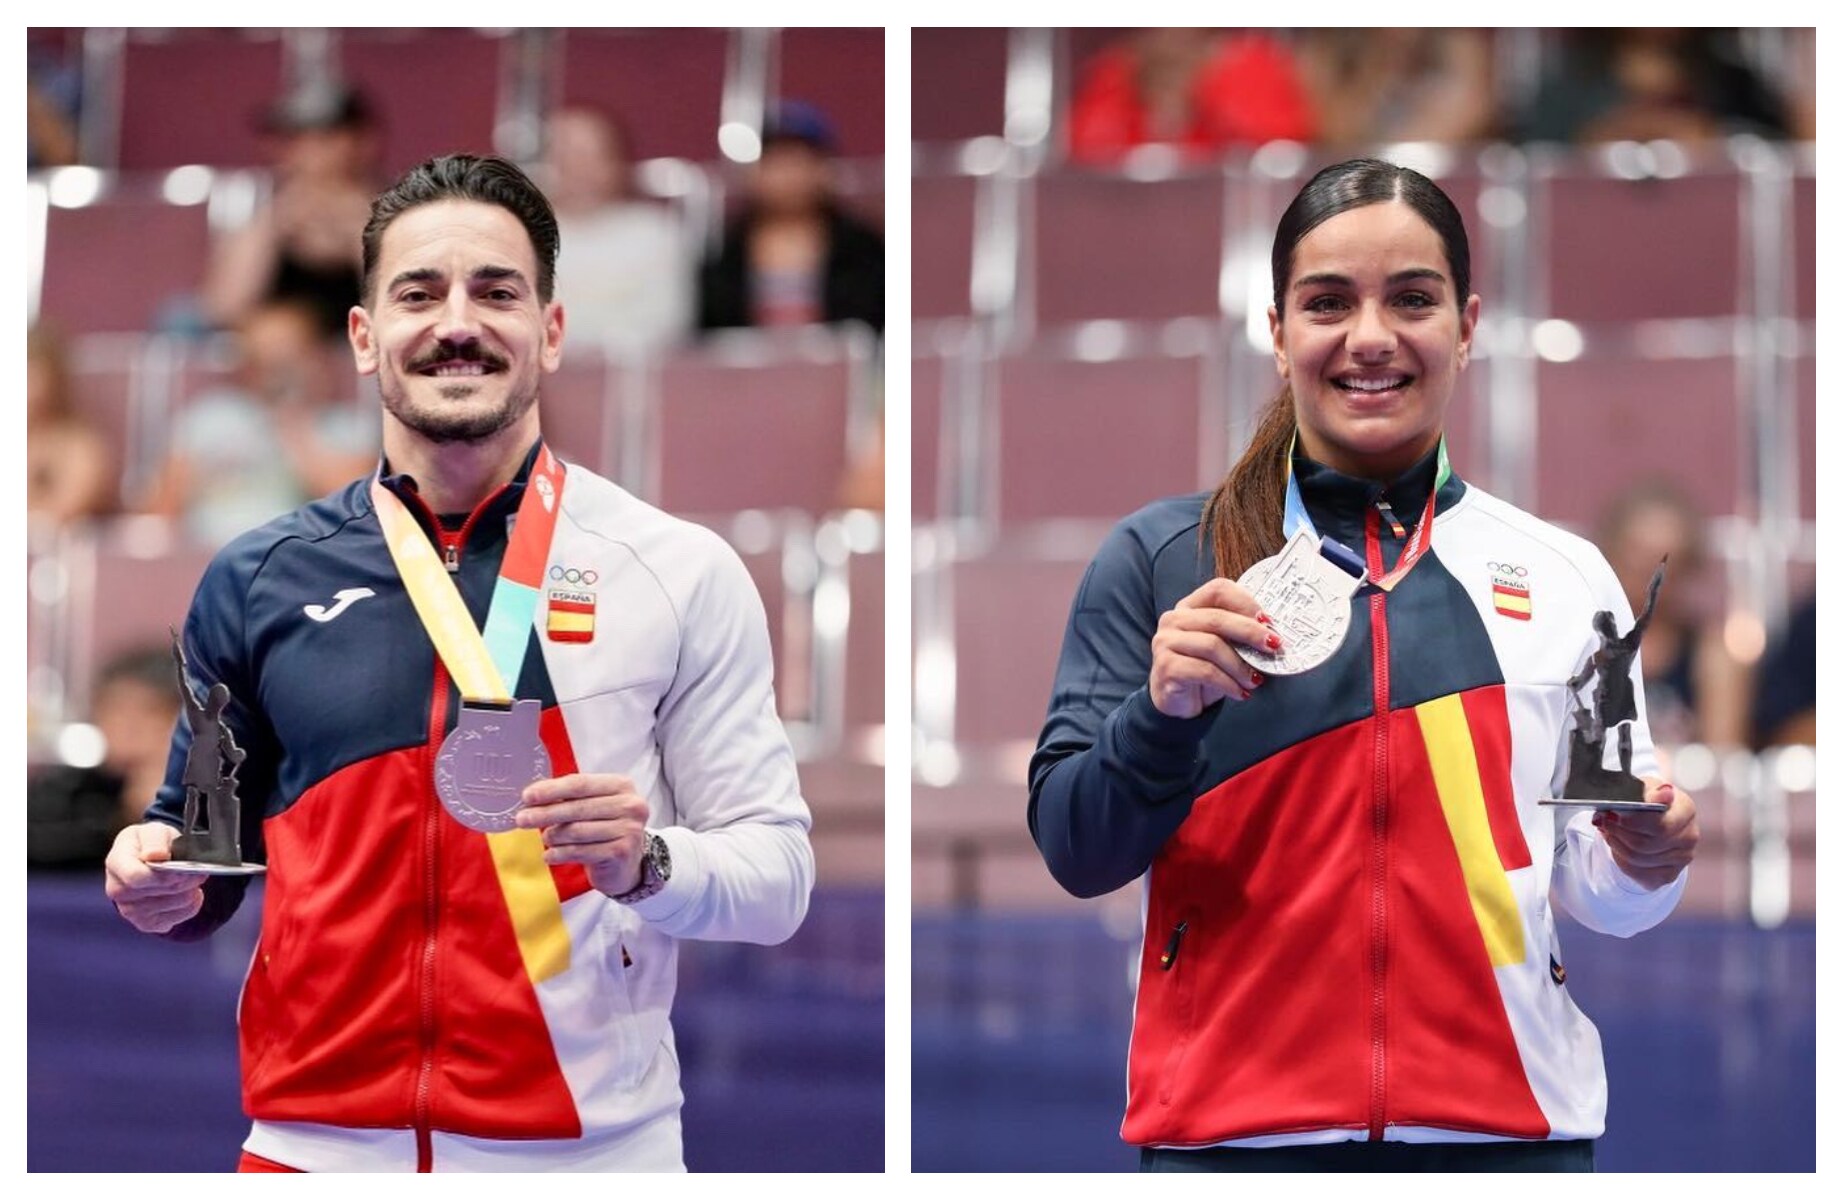 Damián Quintero and María Torres pose with their silver medals at the World Games. /SUR